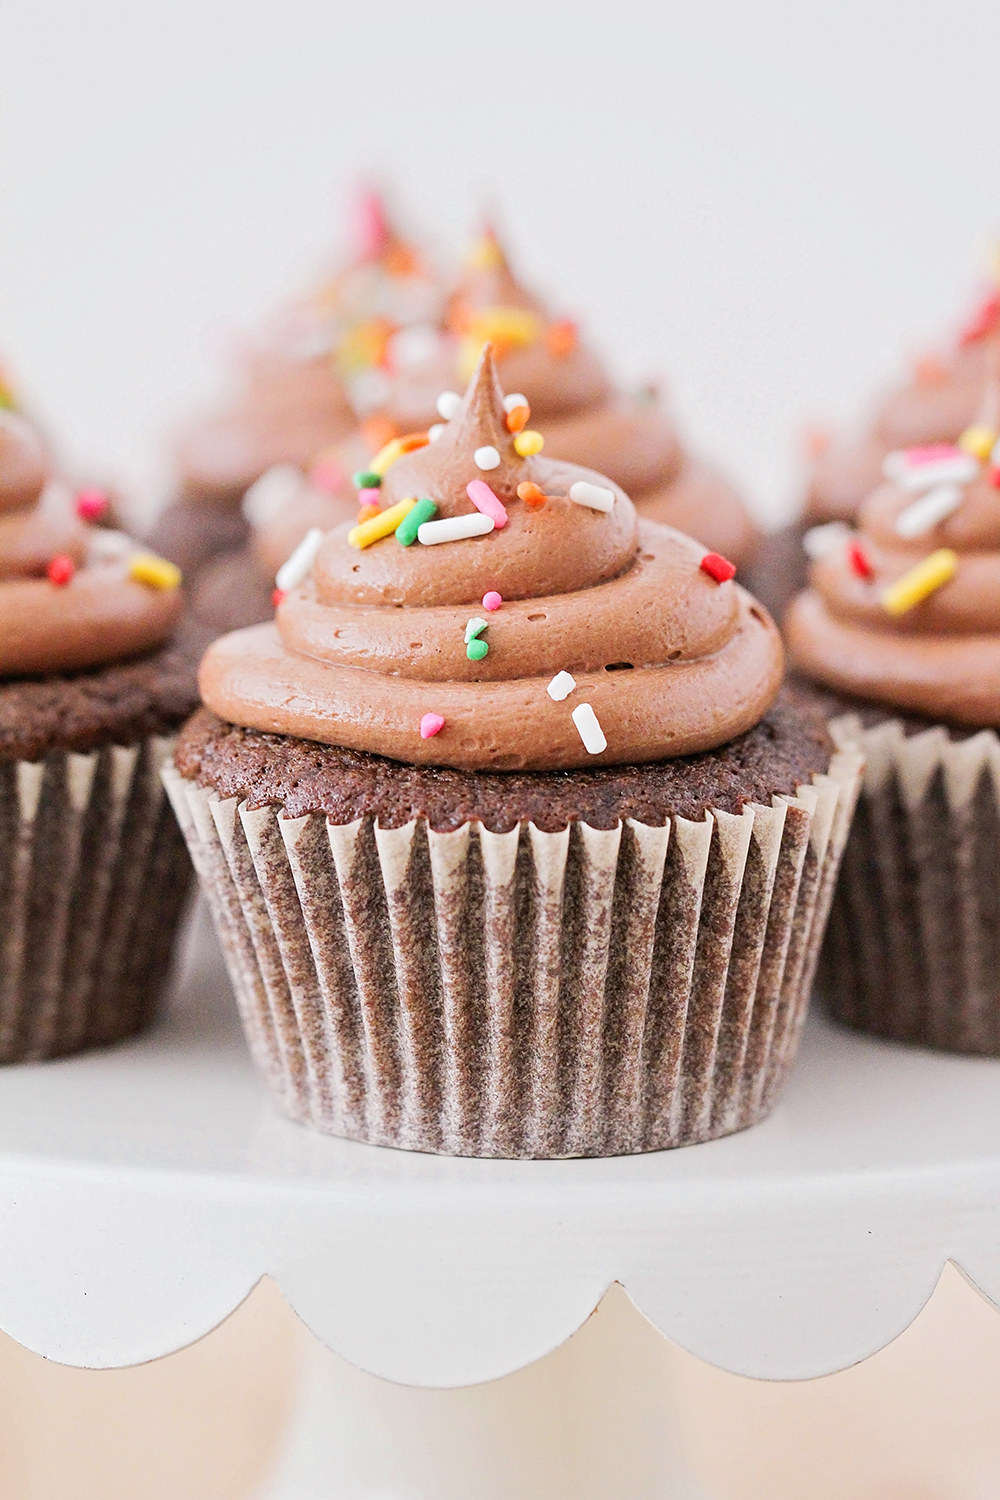 These best ever chocolate cupcakes are amazingly delicious! Tender, moist chocolate cake topped by a light and fluffy chocolate frosting. Perfect for birthdays and special occasions!